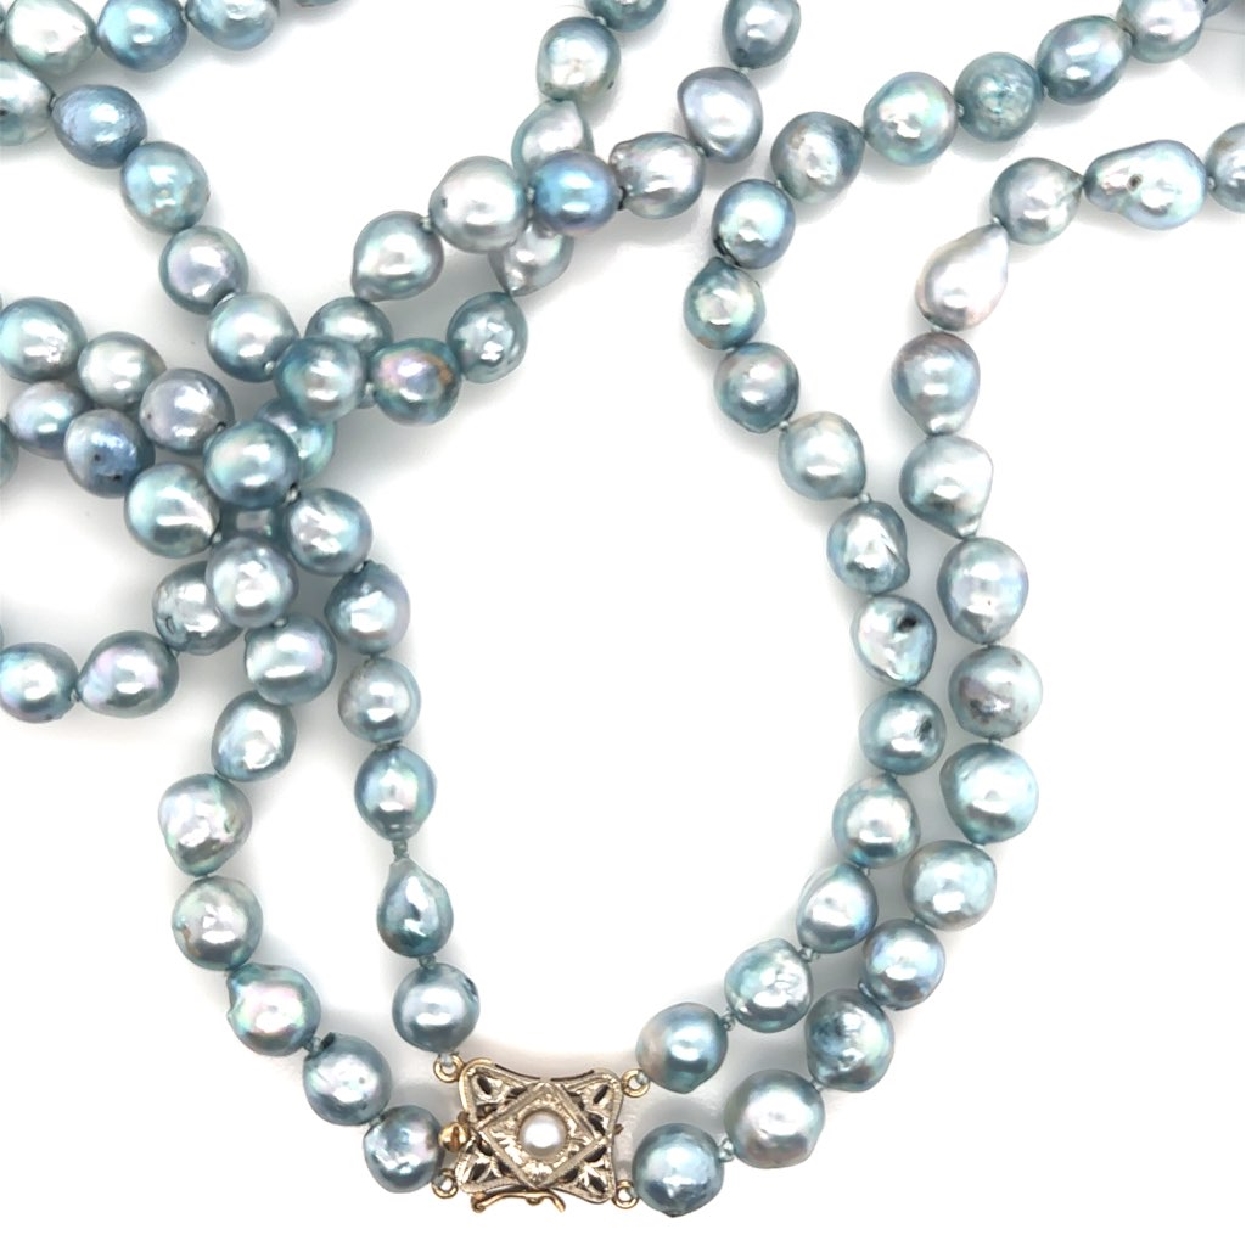 Natural Blue Pearls with Antique 14K Yellow and White Gold Clasp with Seed Pearl Detail 23 Inches